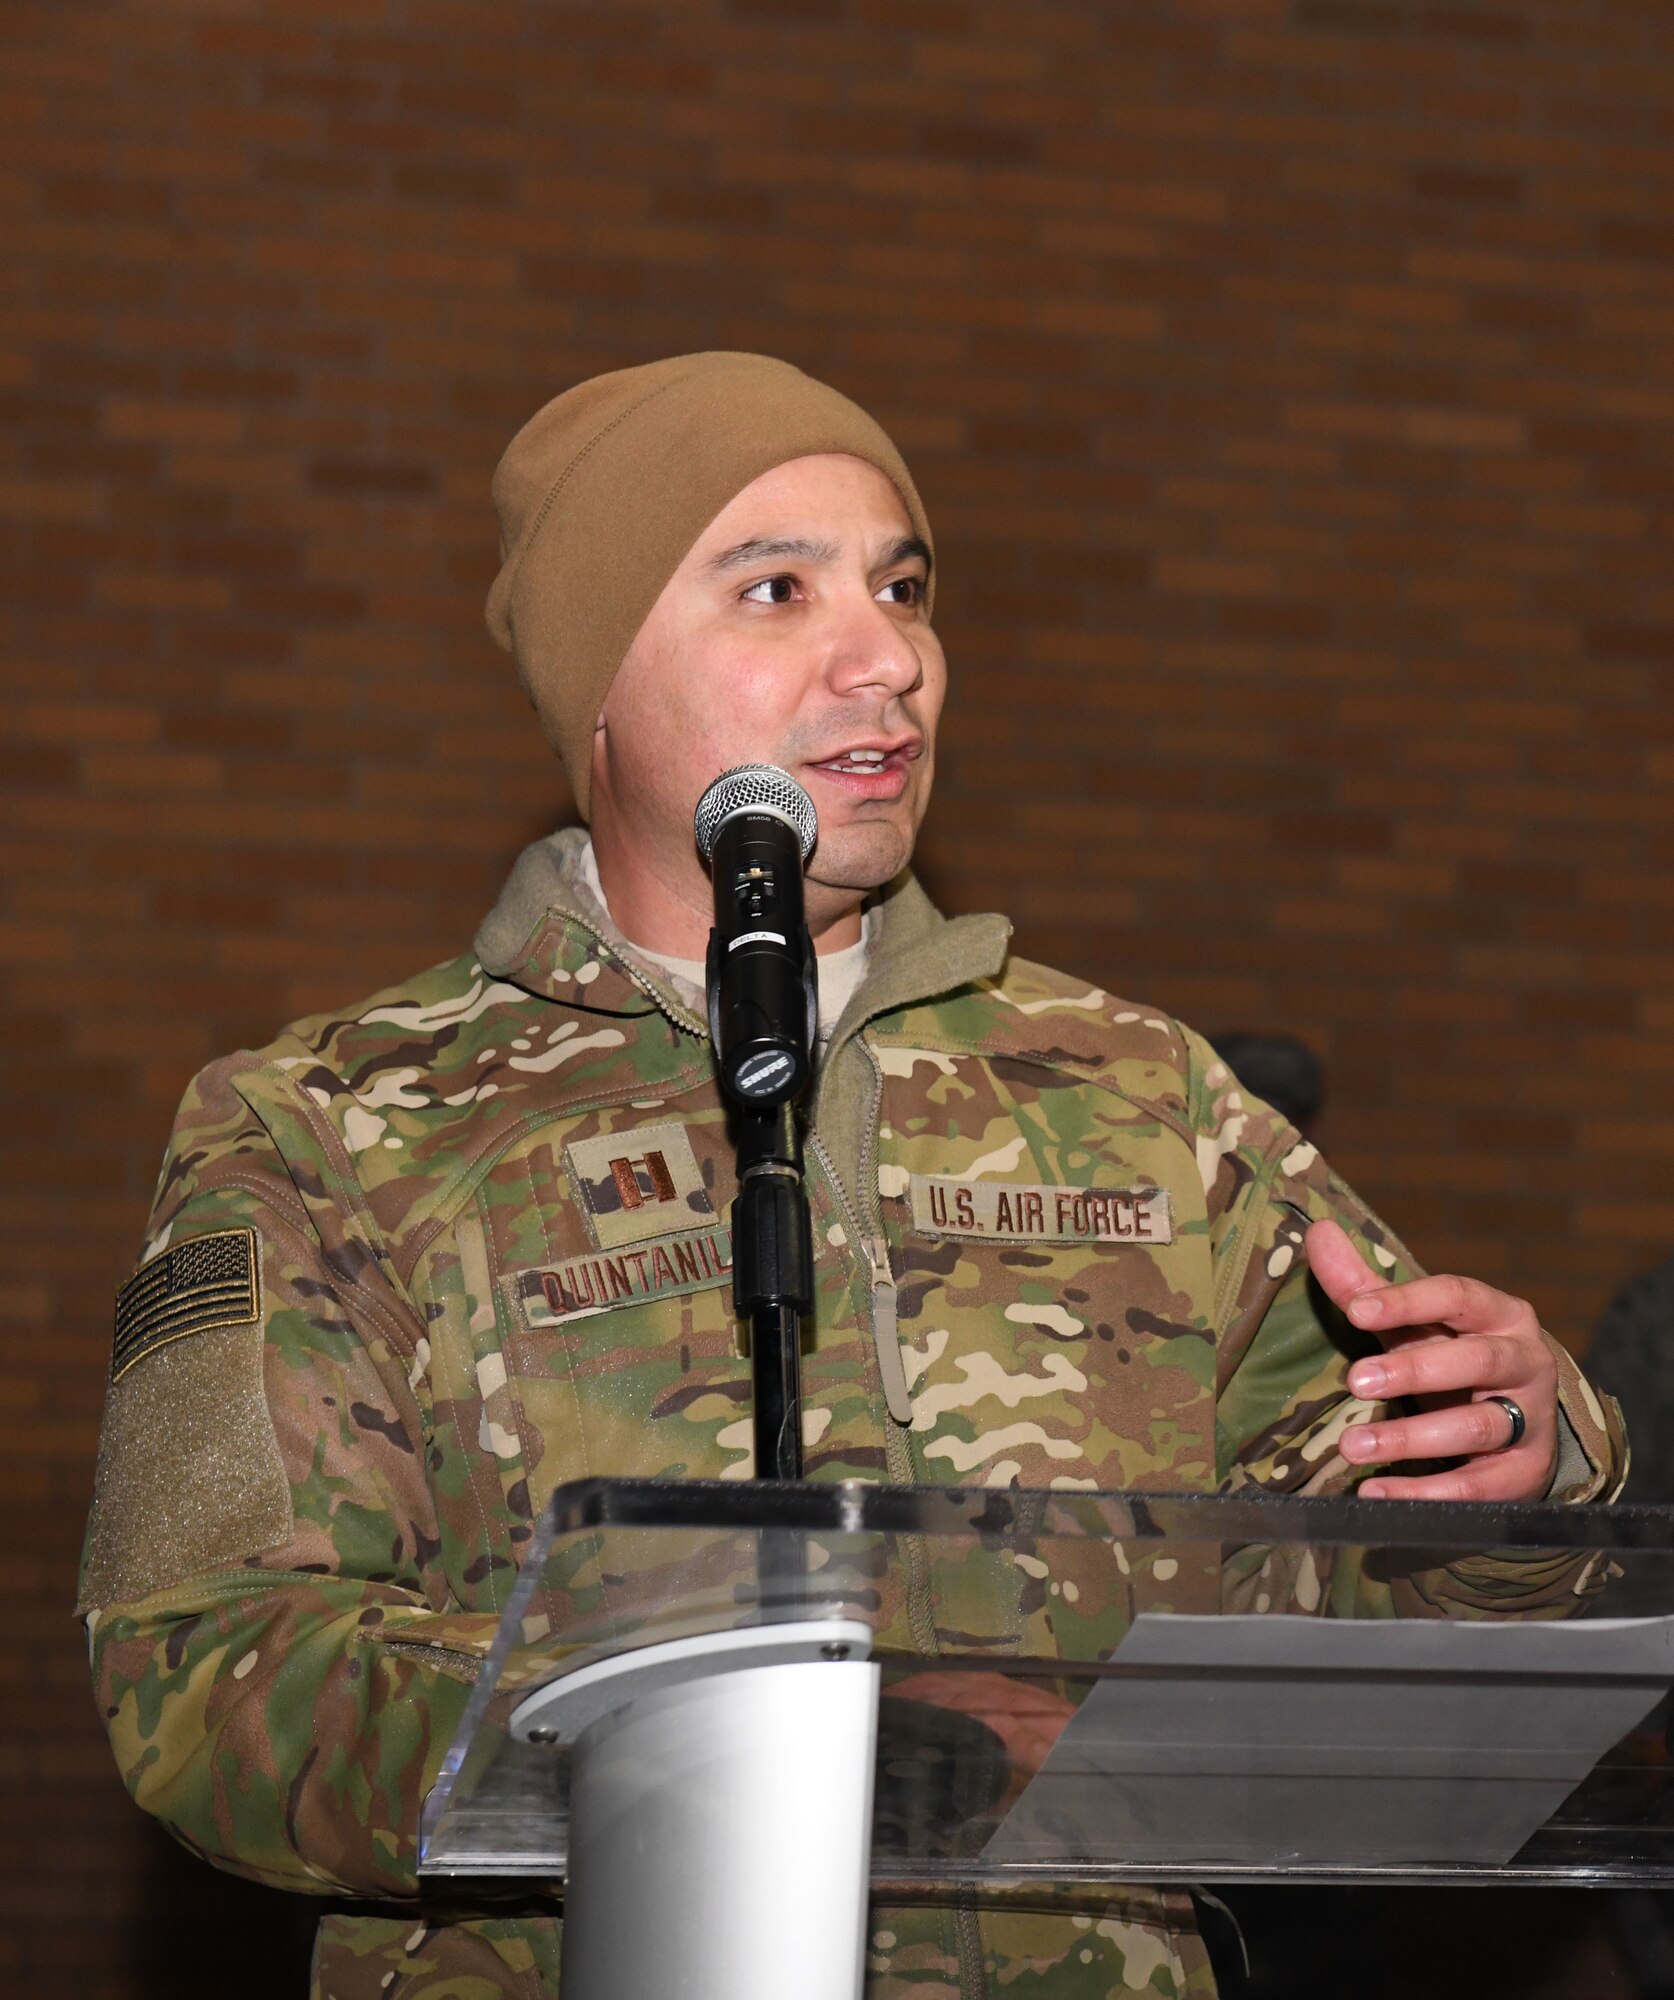 Capt. Benjamin Quintanilla, a 28th Bomb Wing chaplin, delivers a speech at the Freedom Chapel on Ellsworth Air Force Base, S.D., Nov. 30, 2018. Airmen and their families came out to celebrate the lighting of the base tree and to start the holidays in a festive and family-friendly environment where multiple religions were represented. (U.S. Air Force photo by Airman 1st Class Thomas Karol)